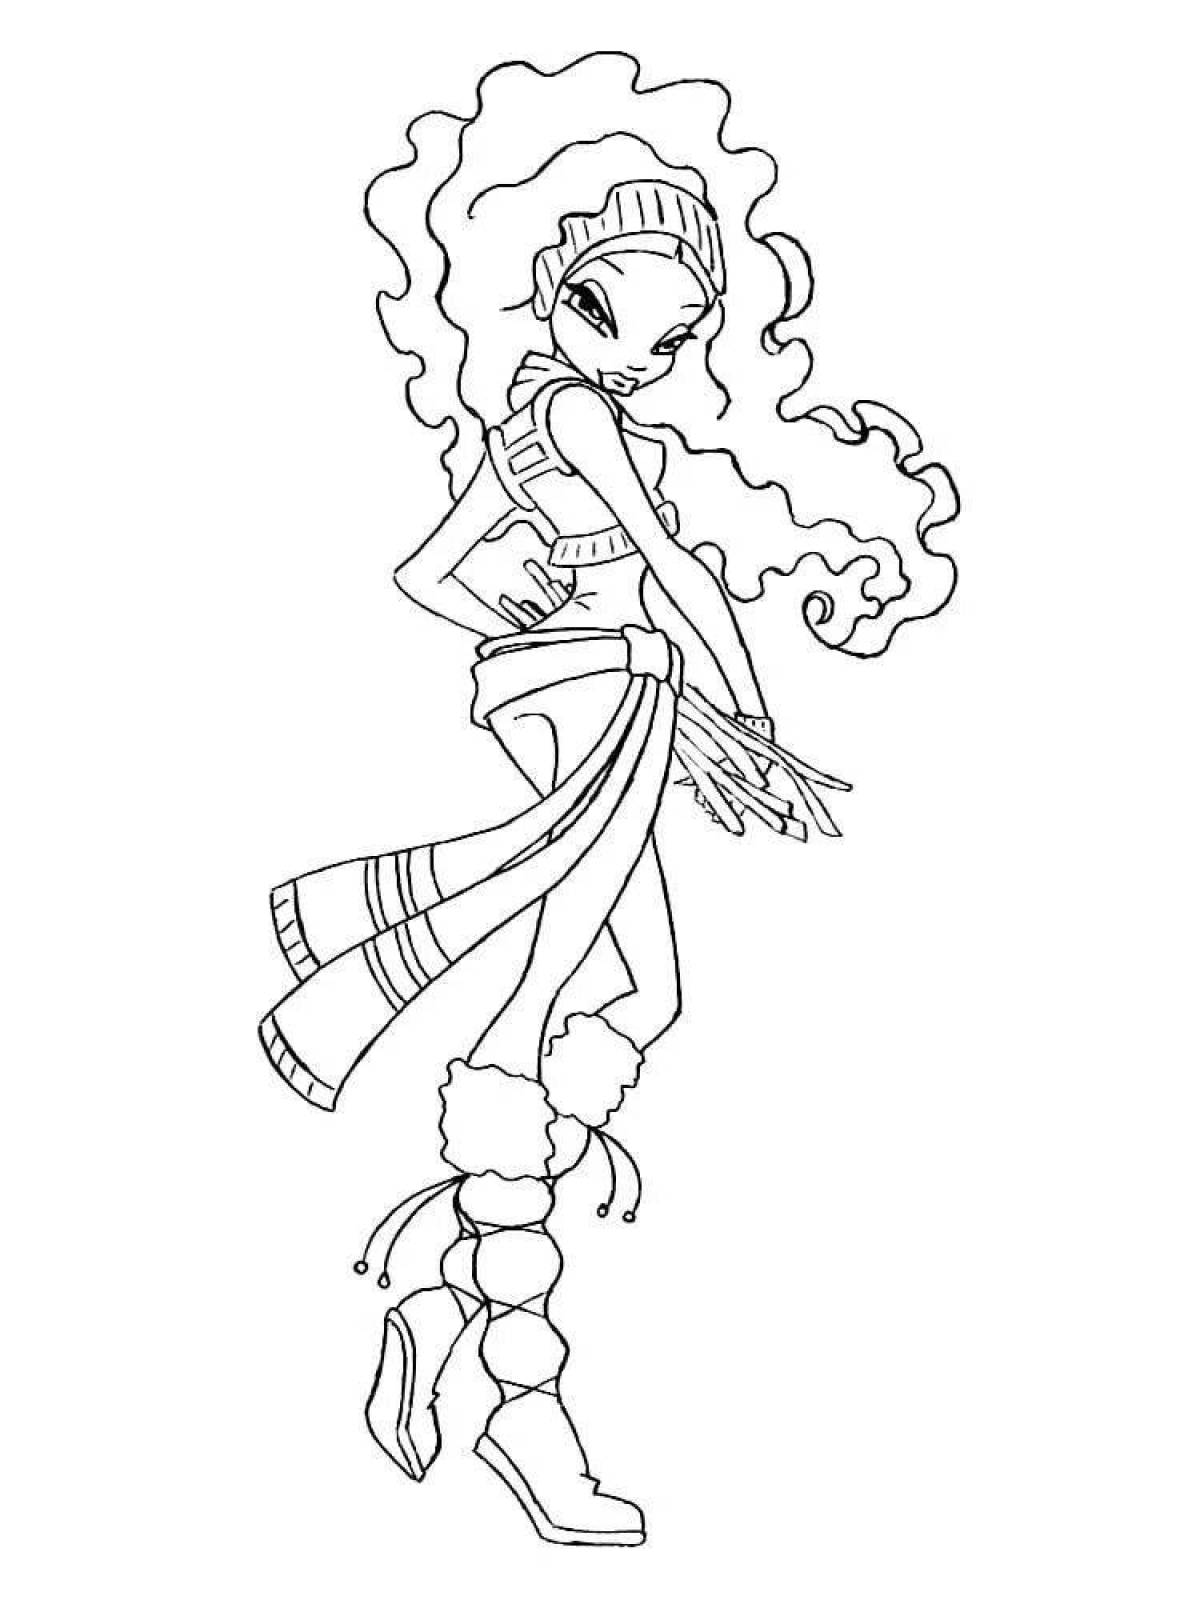 Layla's shiny coloring page